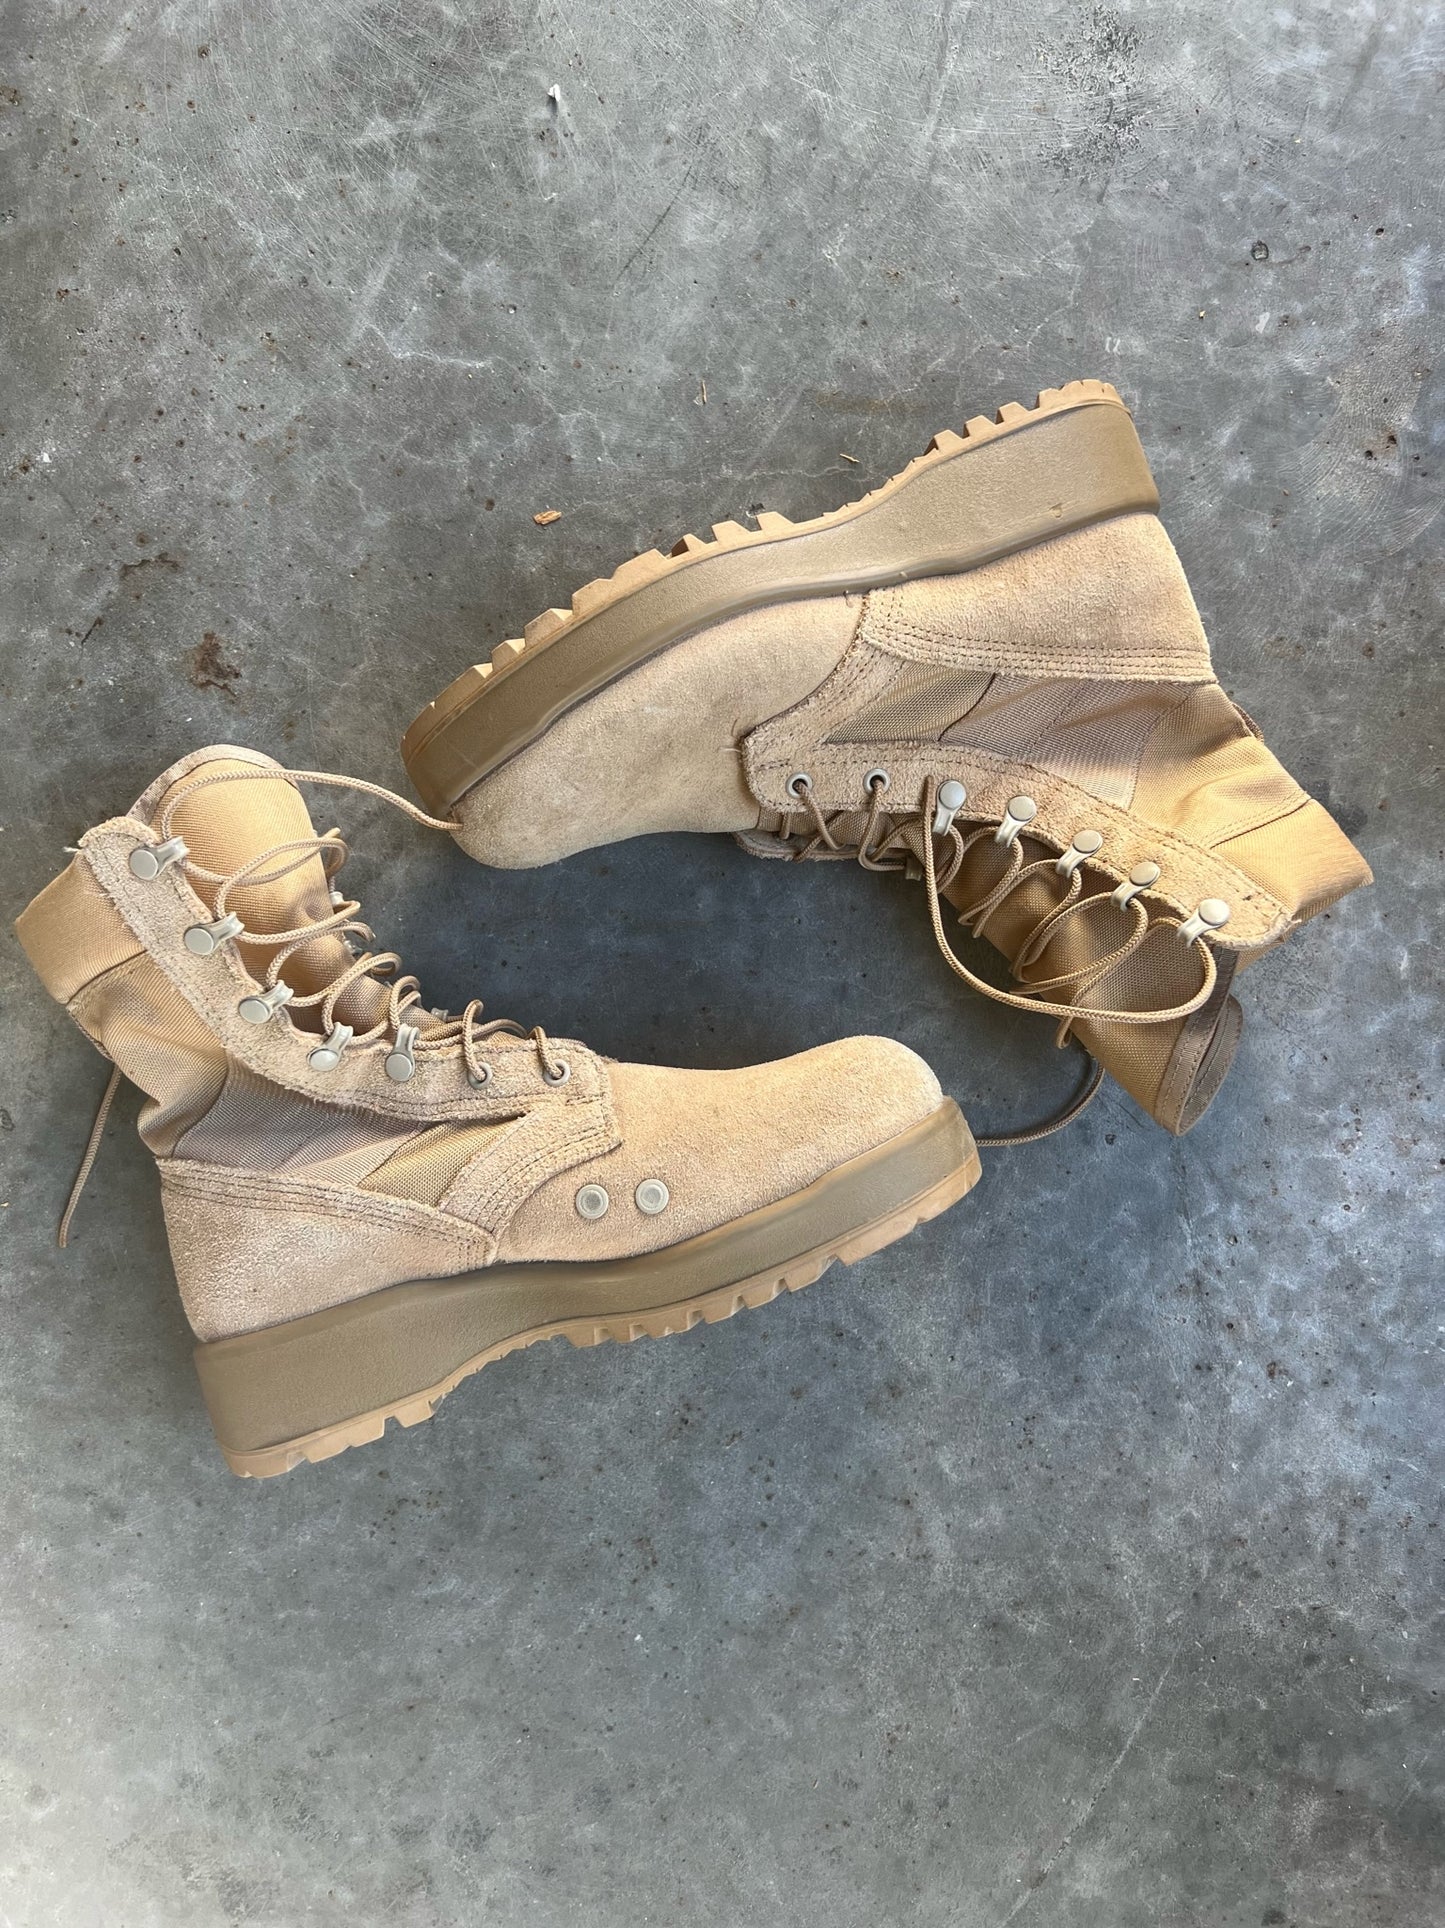 Vintage Military Boots - 7.5